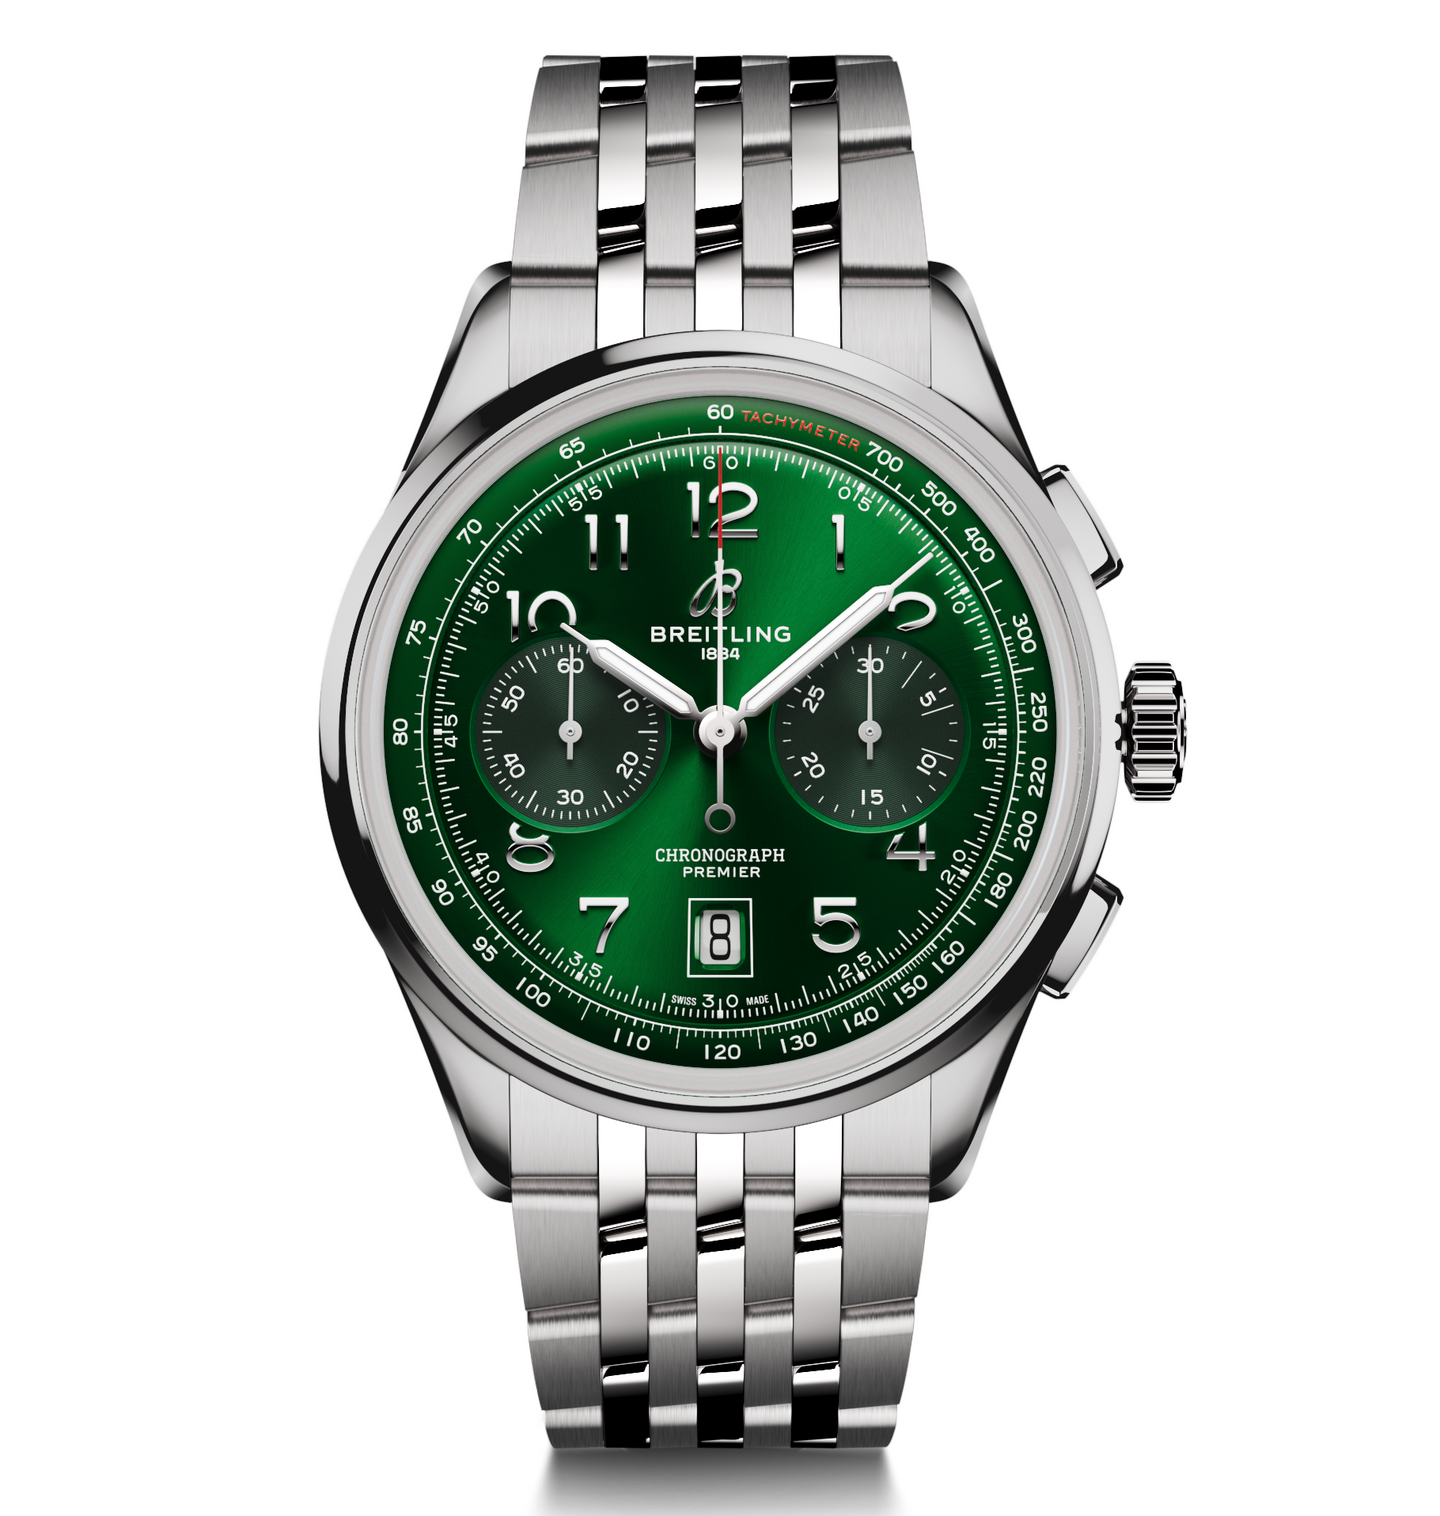 Breitling Premier B01 Chronograph 42mm Watch with Green Dial